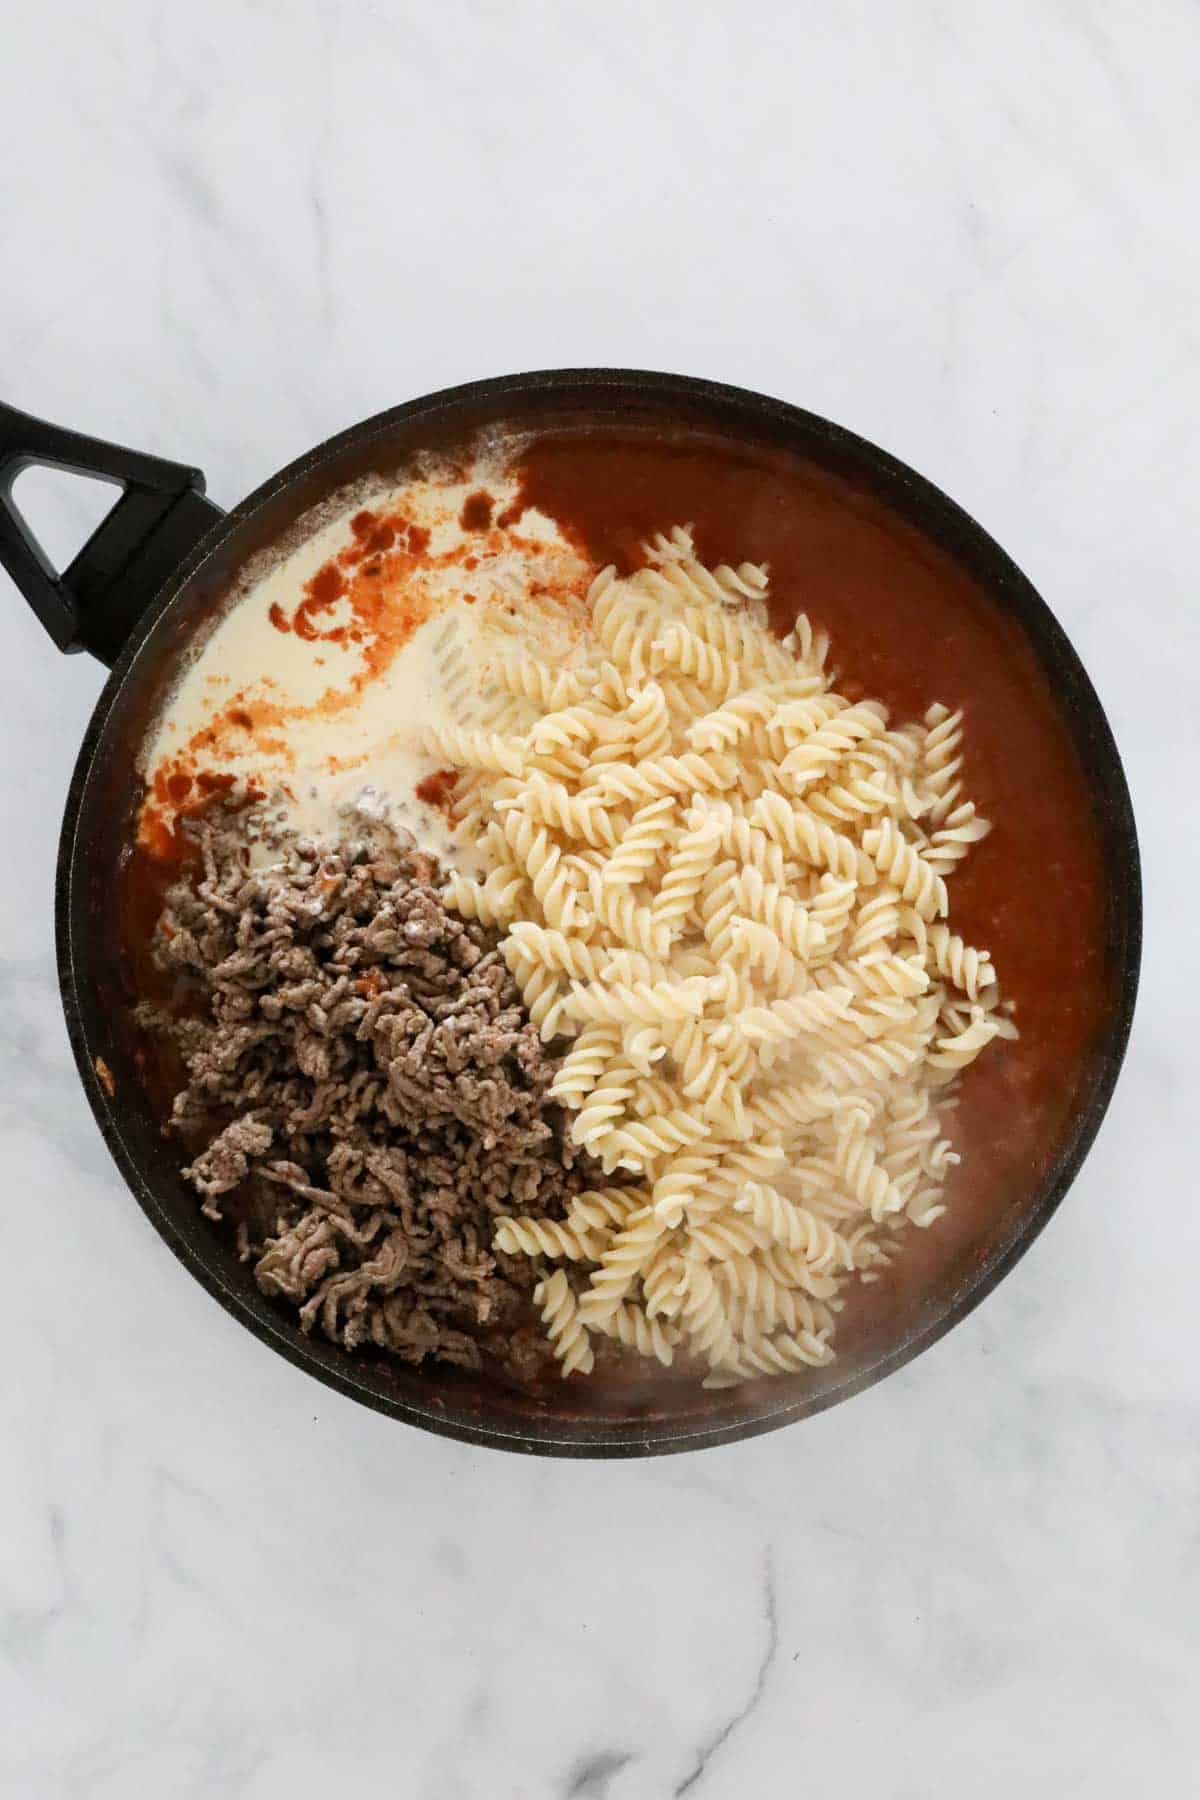 Browned mince, cooked spirals and cream added to the tomato sauce in the pan.